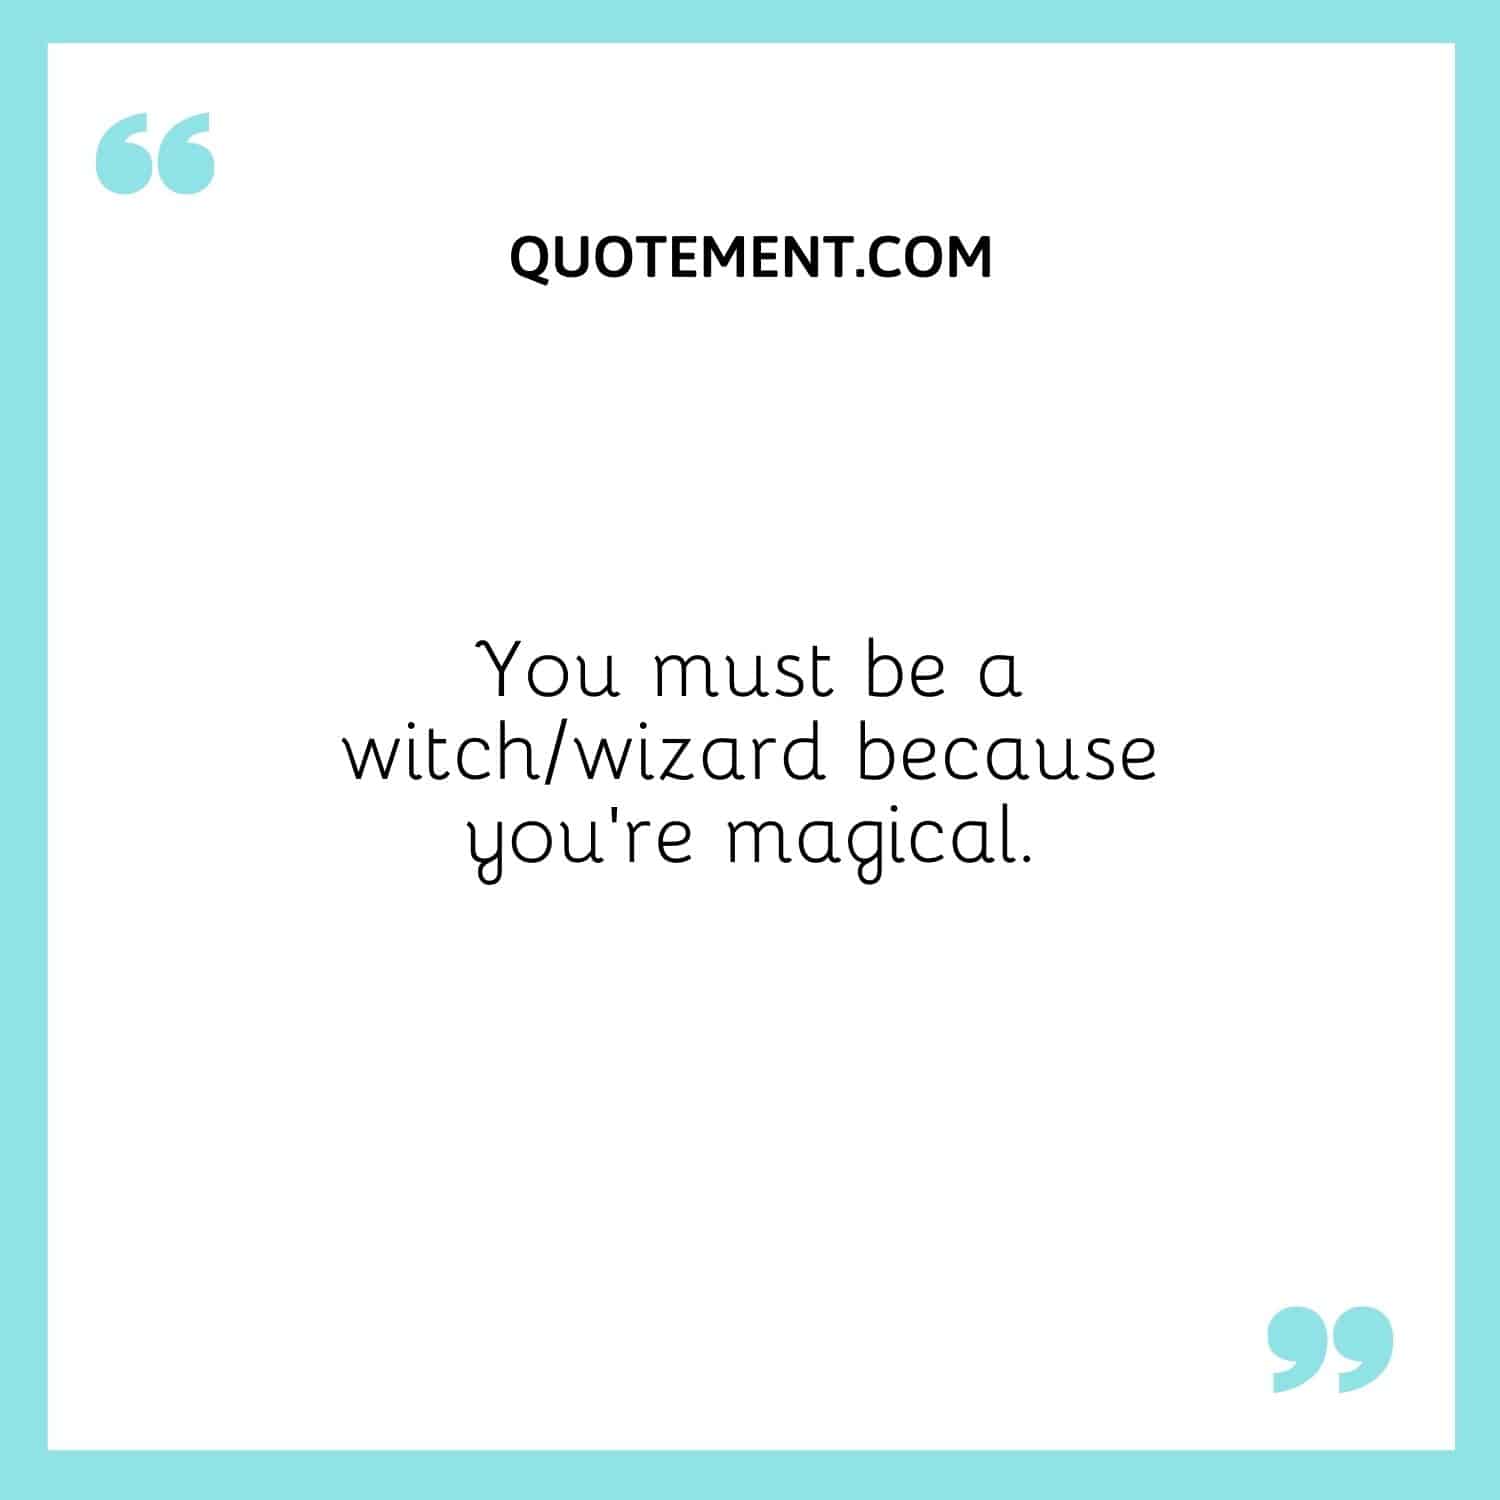 You must be a witchwizard because you’re magical.